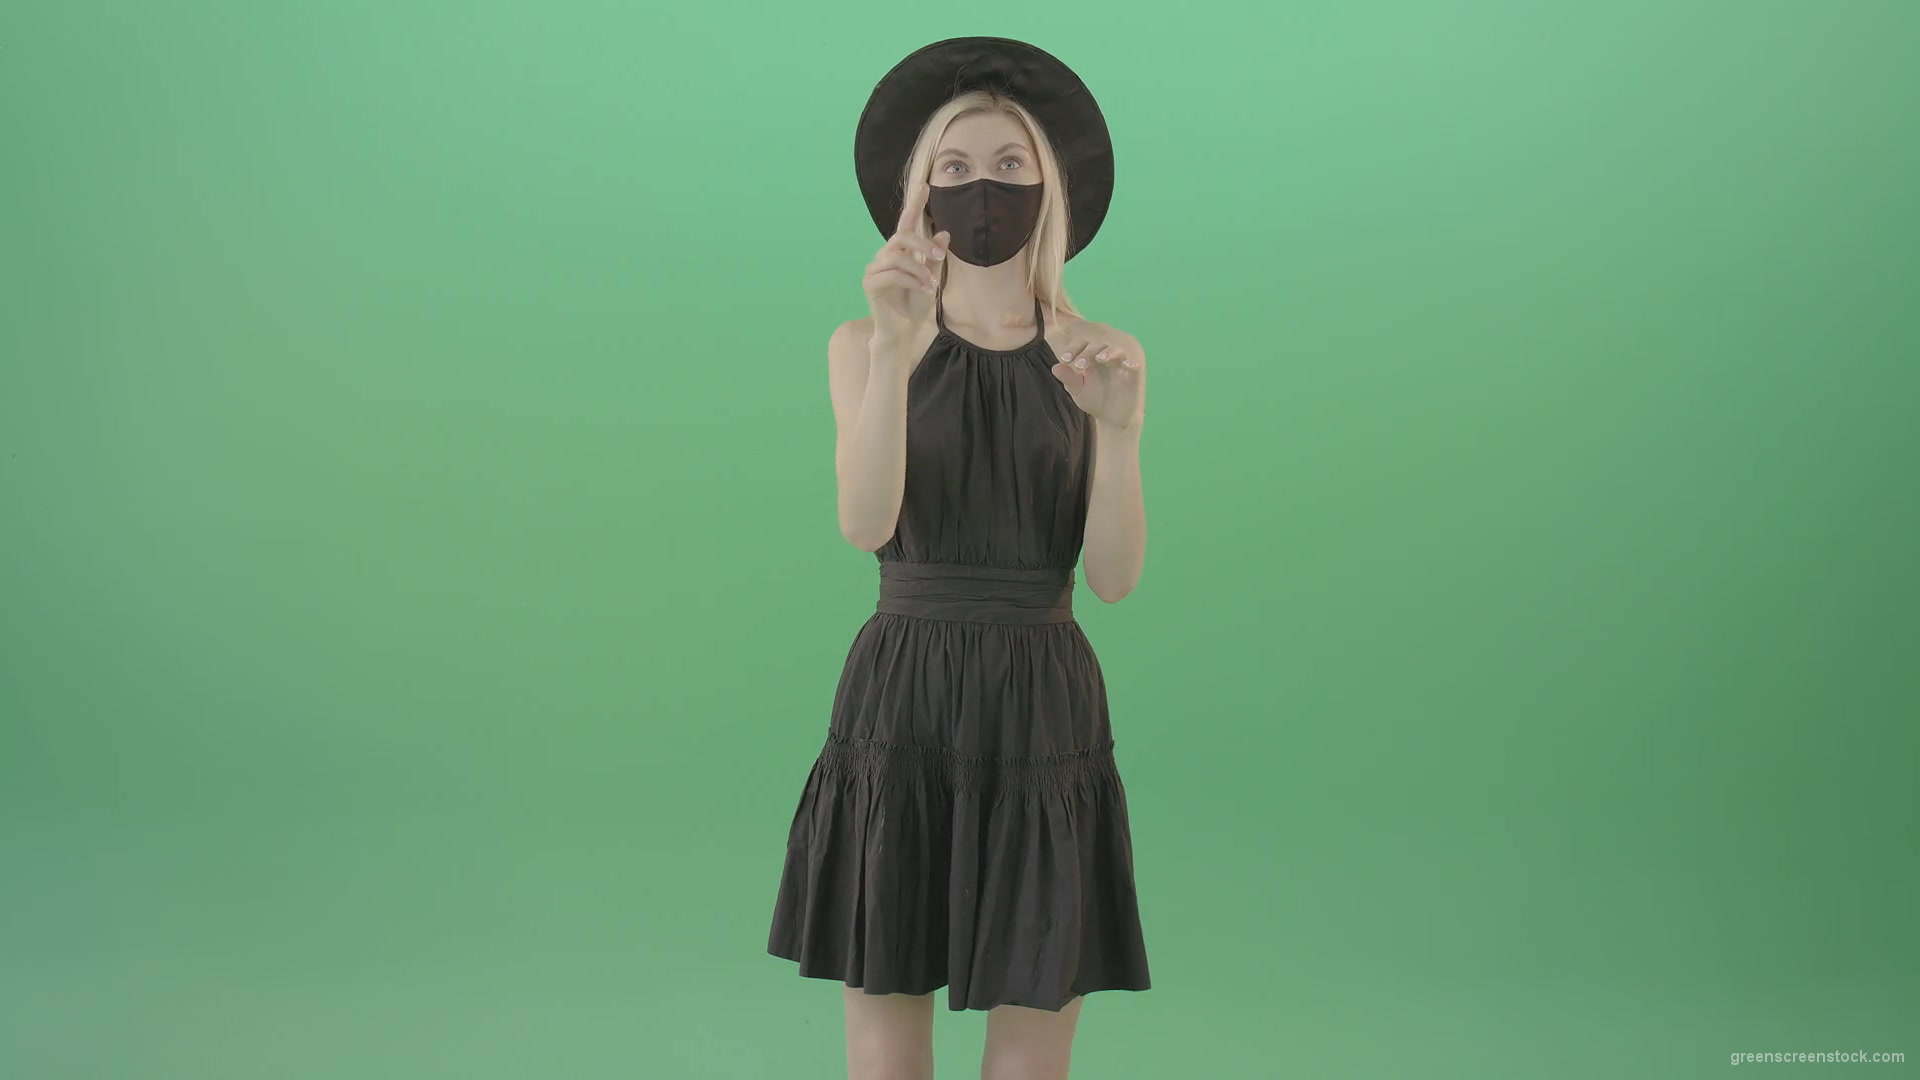 Covid-19-girl-in-black-mask-working-on-virtual-keyboard-buttons-and-touch-screen-on-green-background-4K-Video-Footage-1920_008 Green Screen Stock